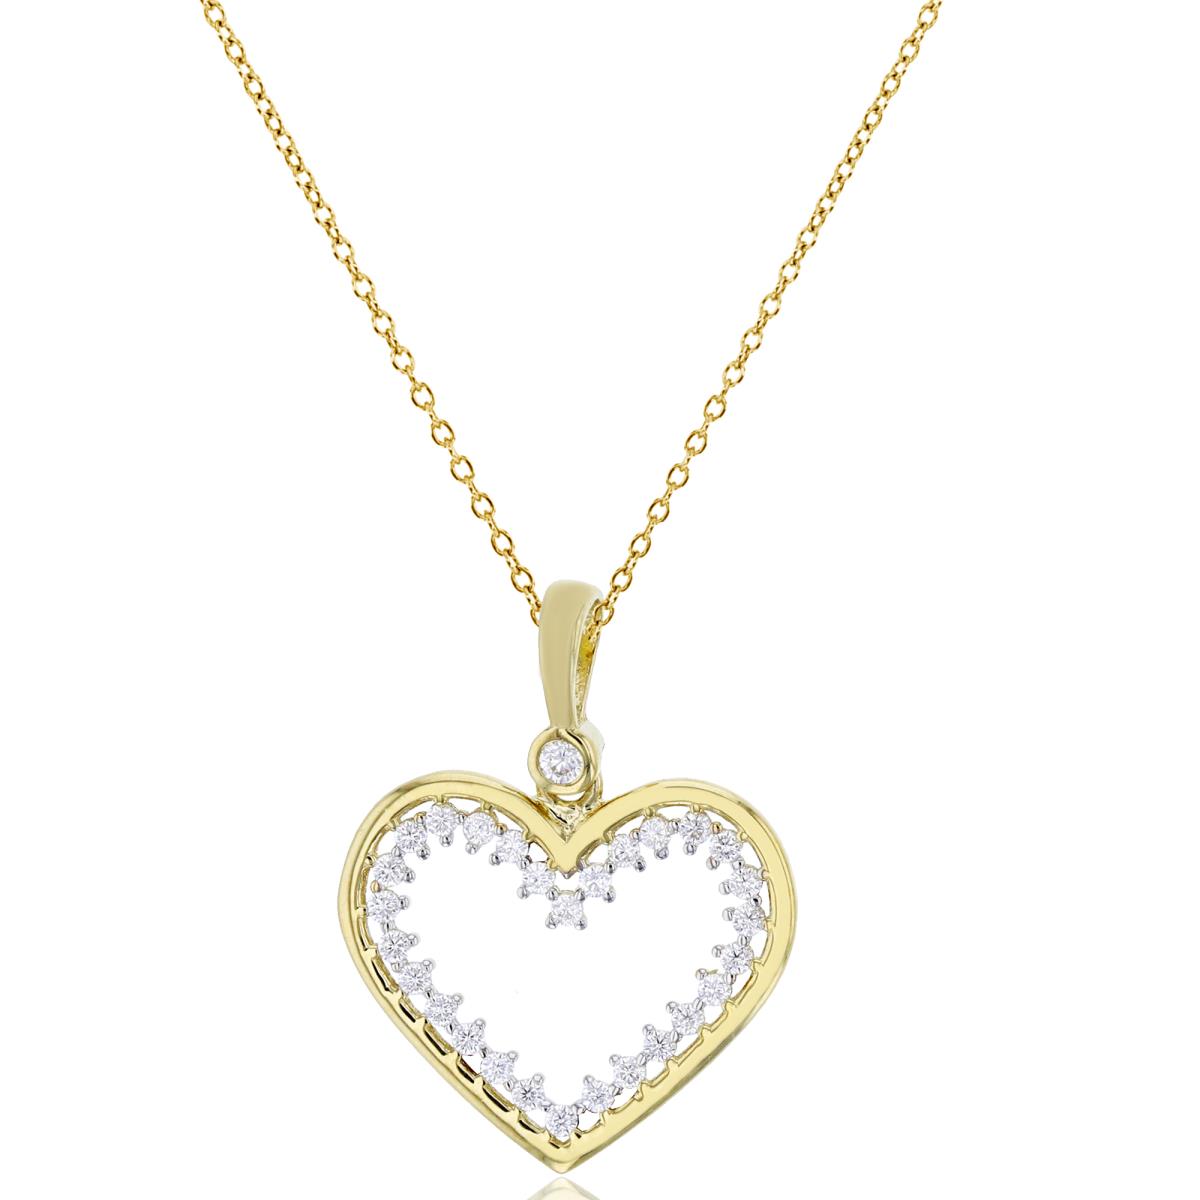 10K Yellow Gold 22x17mm Polished & Paved Open Heart 18" Necklace